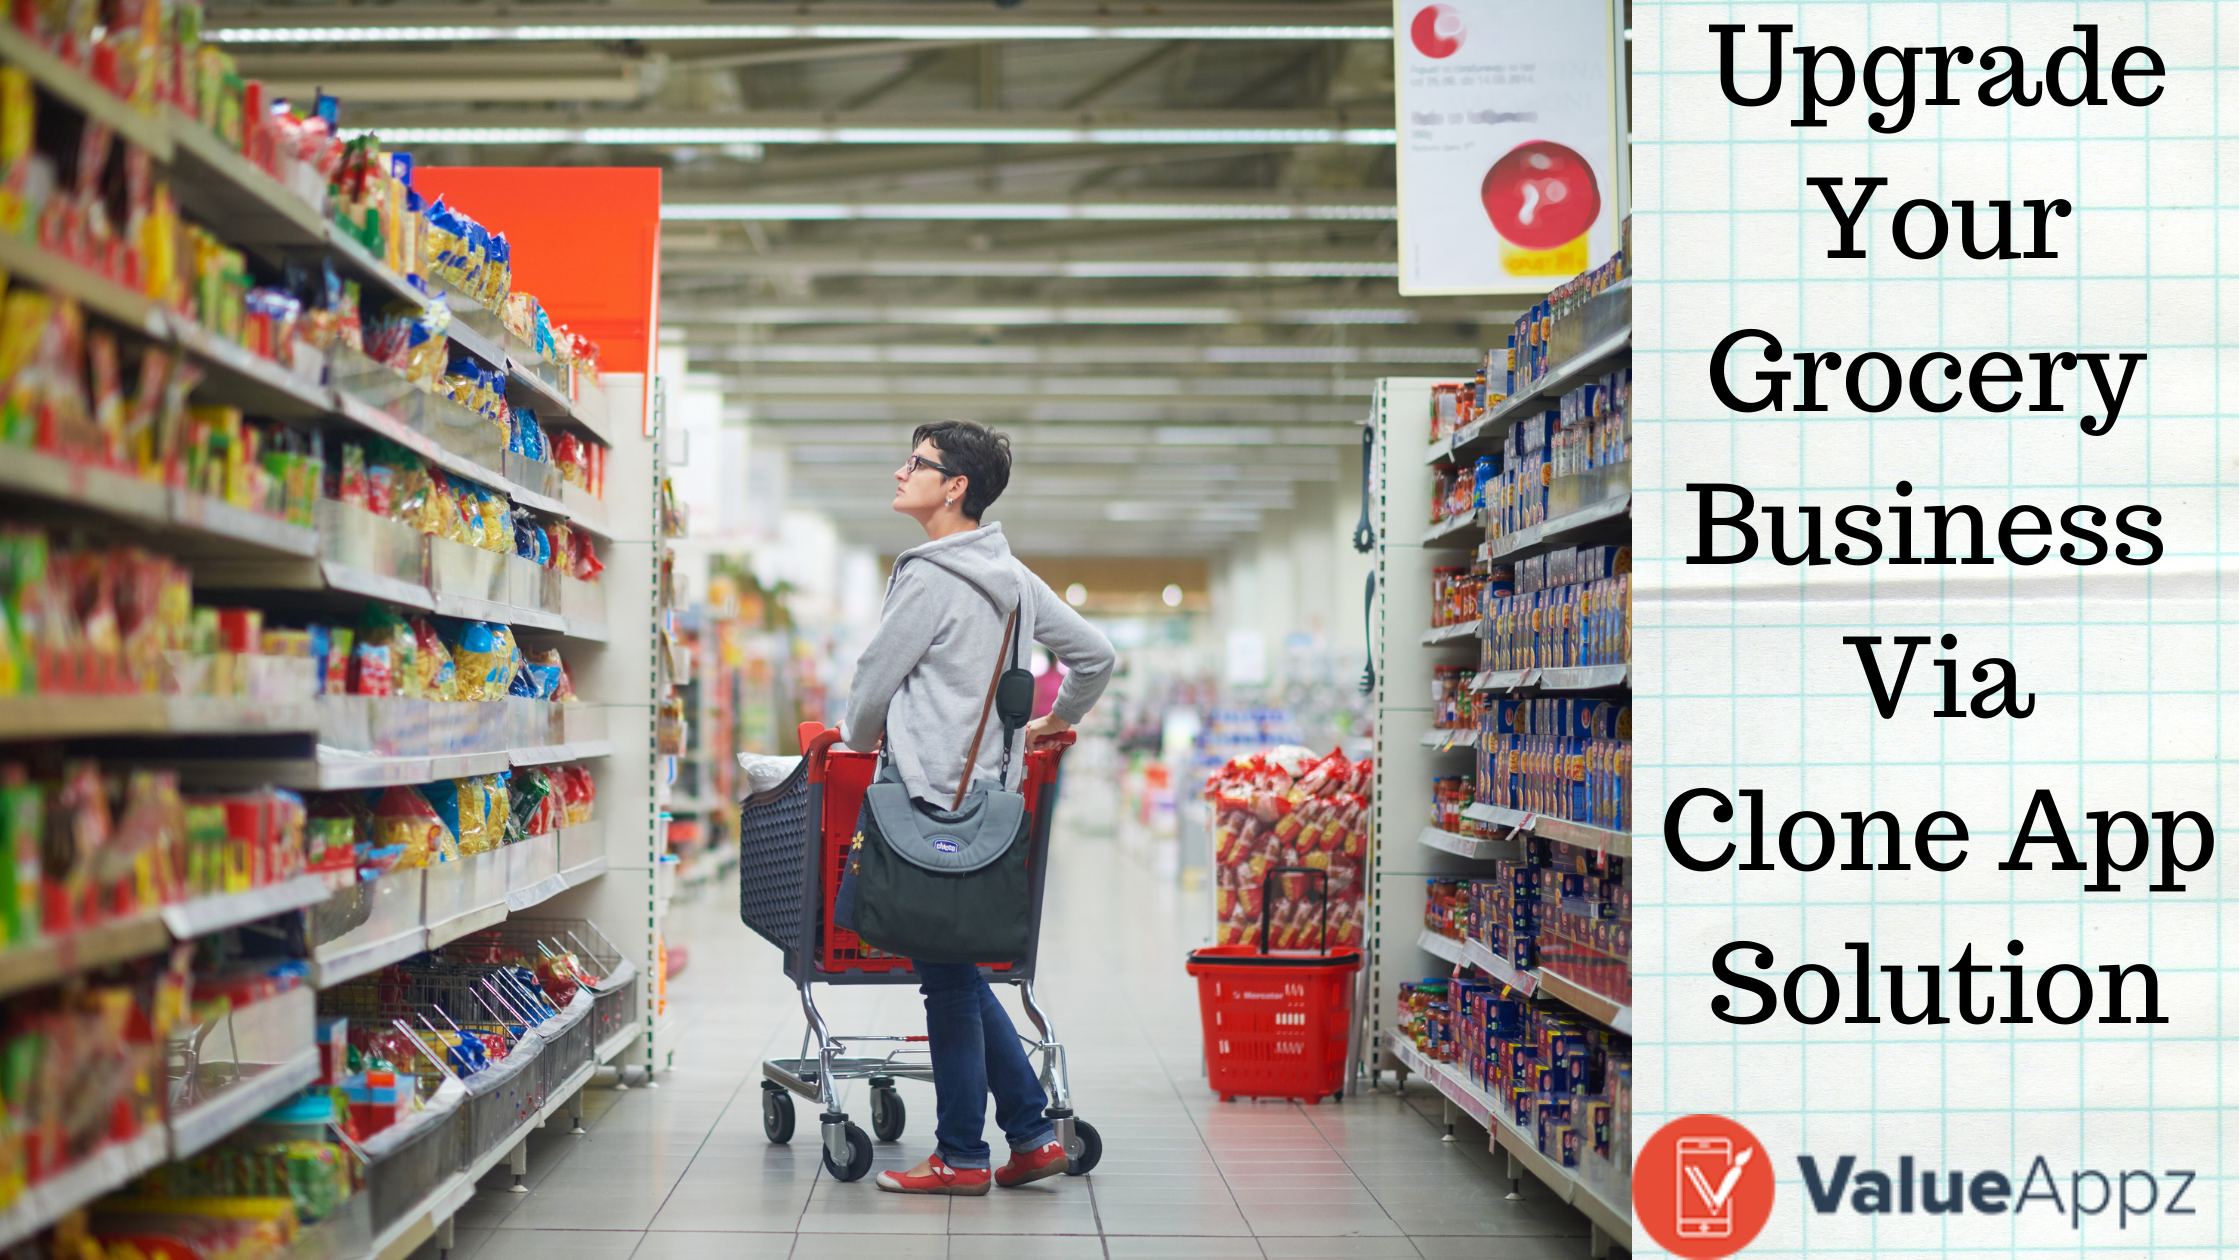 Upgrade Your Grocery Business Via Our Clone App Solution